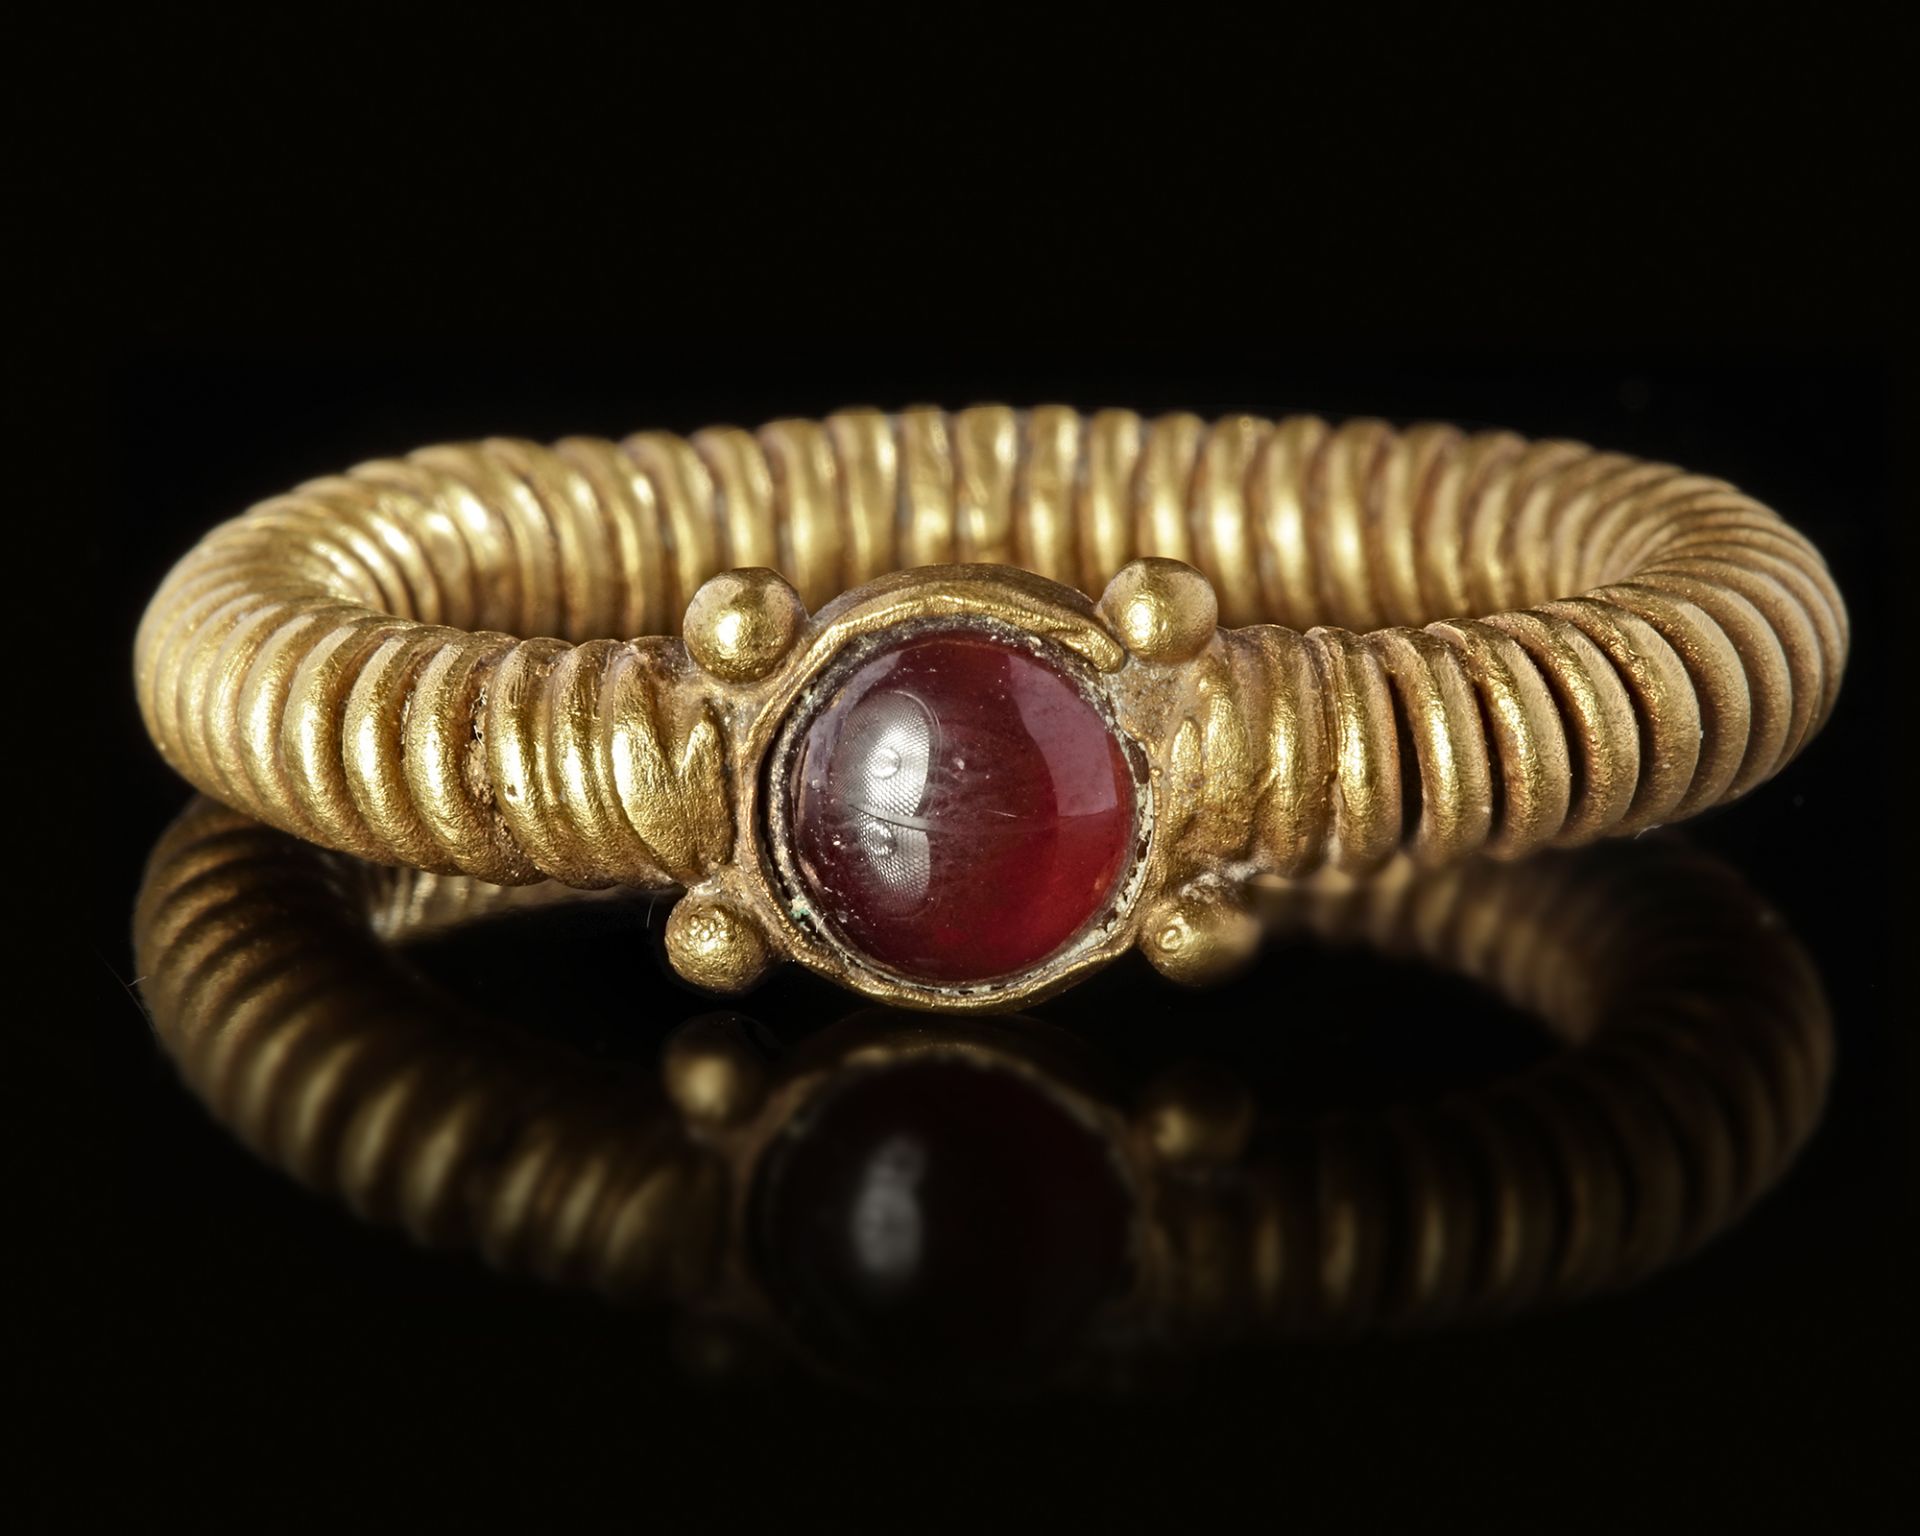 A PHOENICIAN GOLD RING, 5TH-6TH CENTURY BC